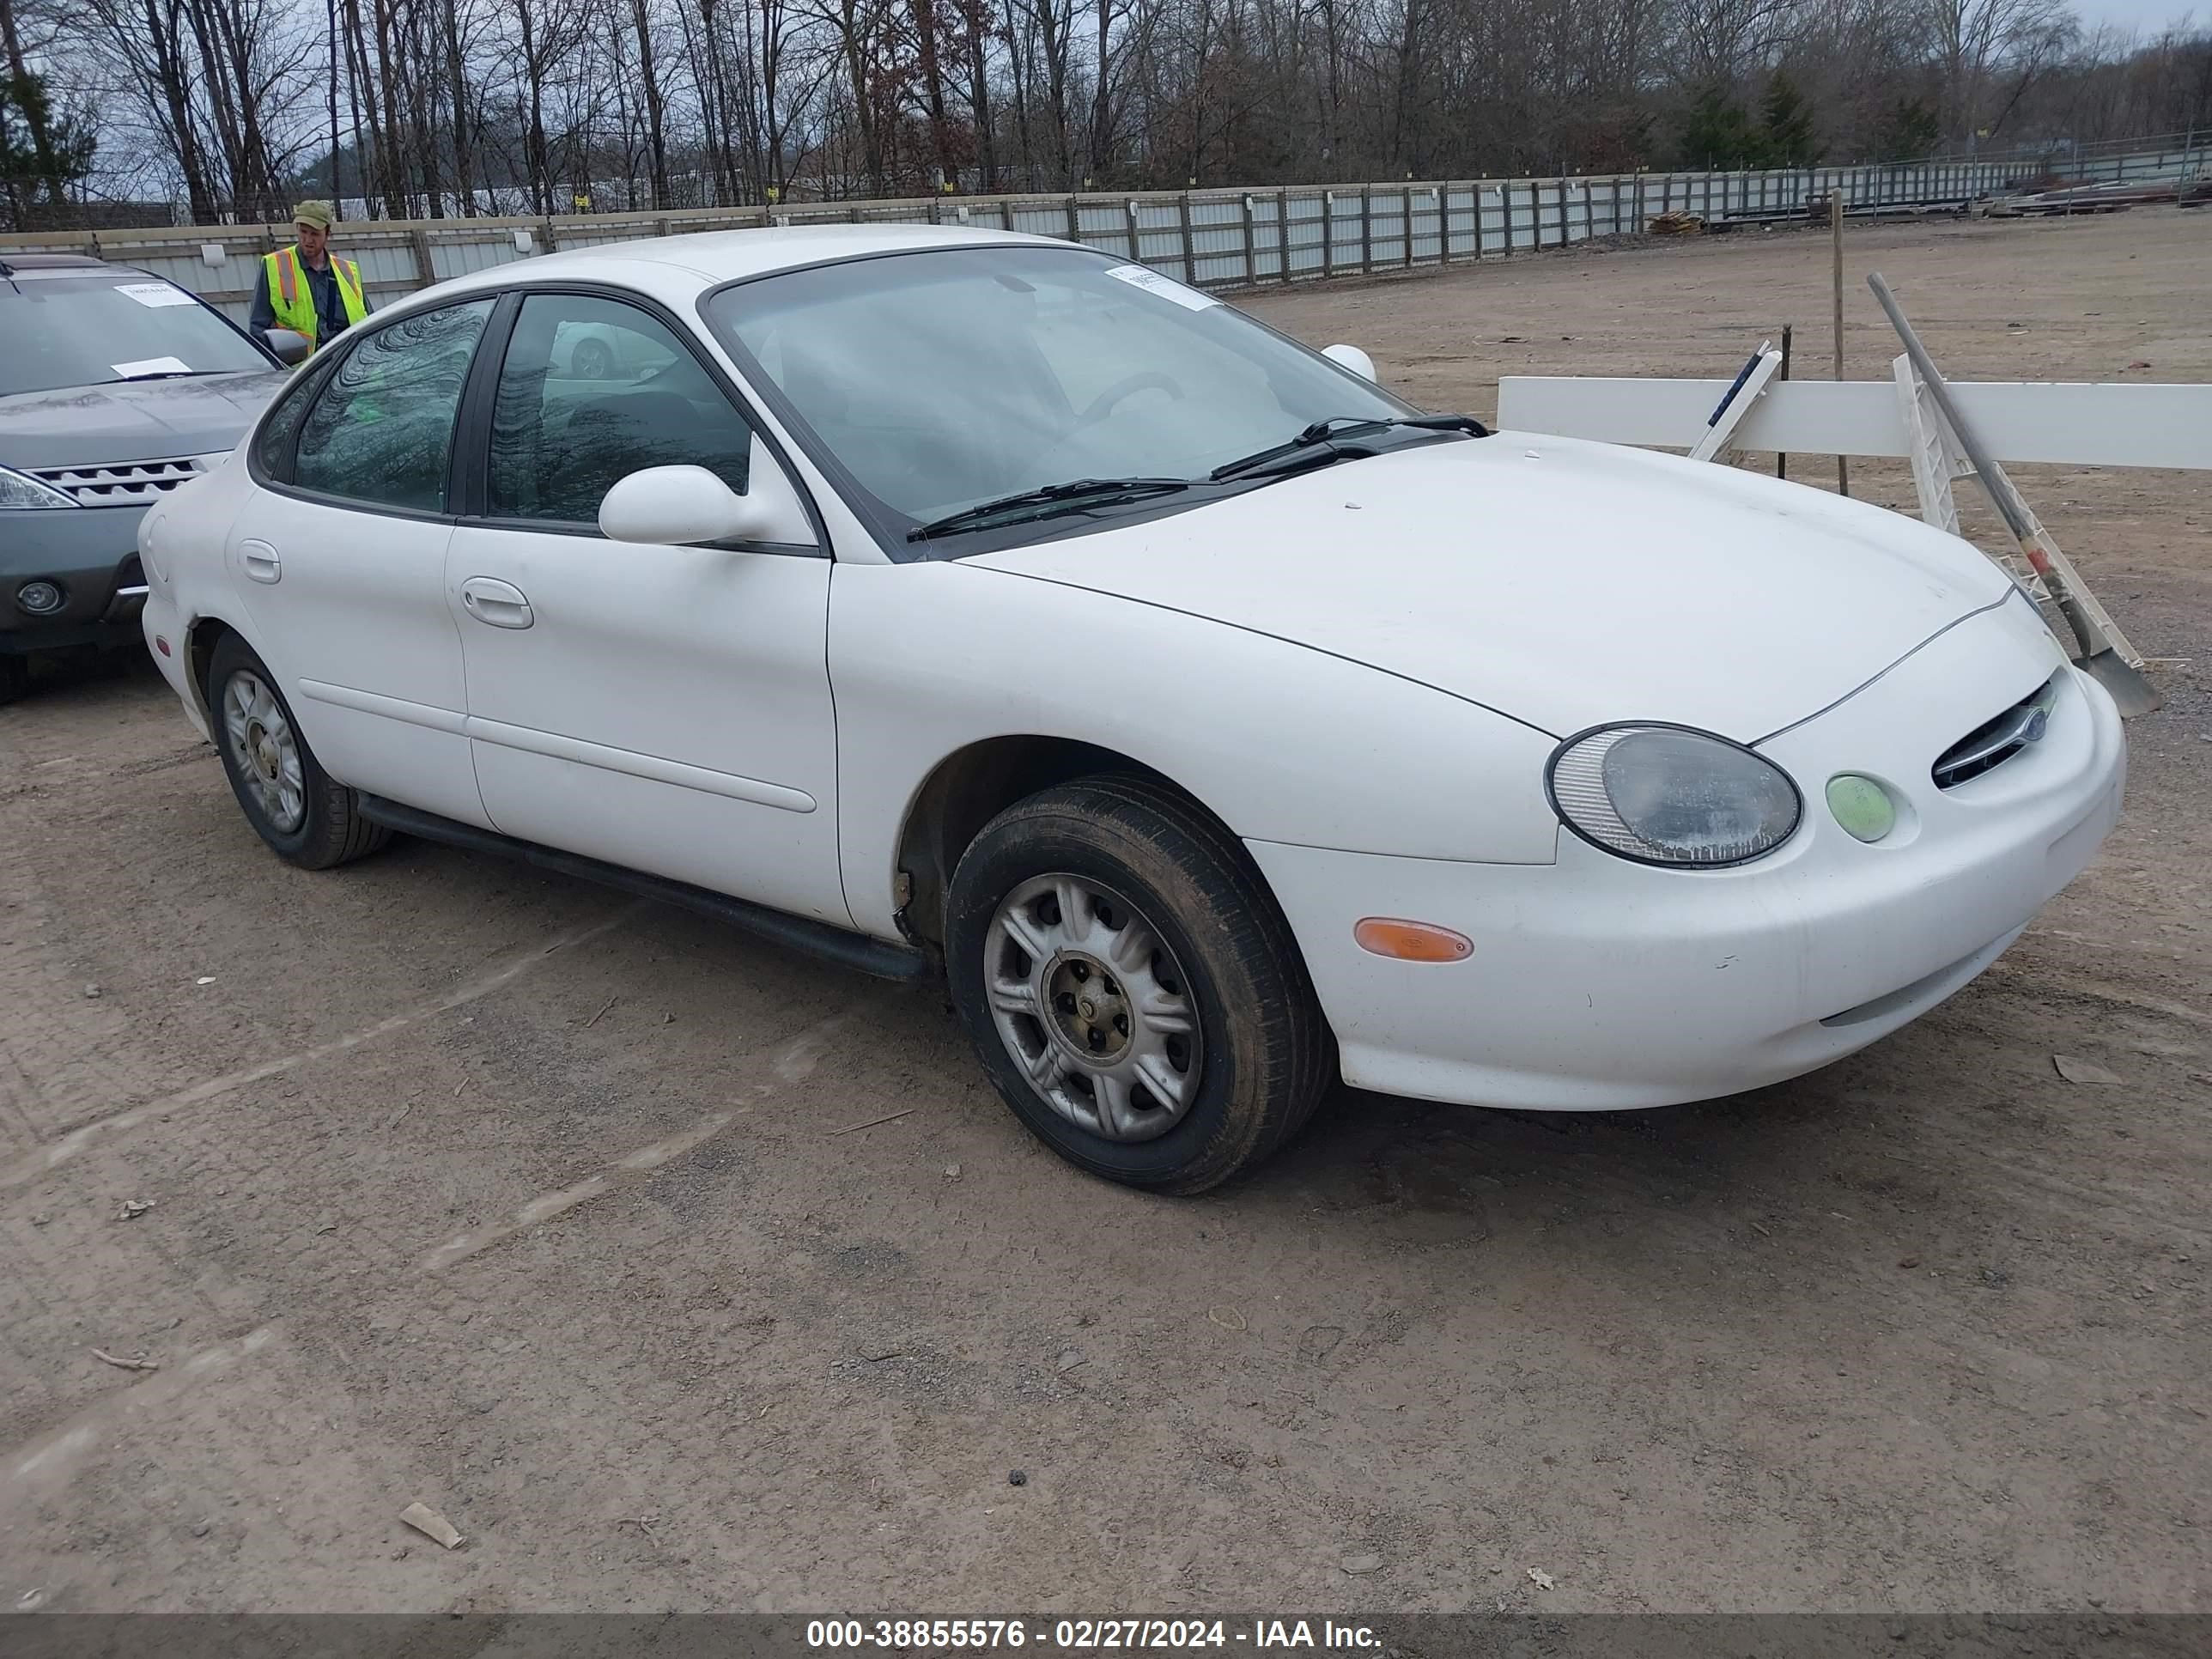 vin: 1FALP52U8TA148178 1FALP52U8TA148178 1996 ford taurus 3000 for Sale in 37914, 3634 E. Governor John Sevier Hwy, Knoxville, Tennessee, USA